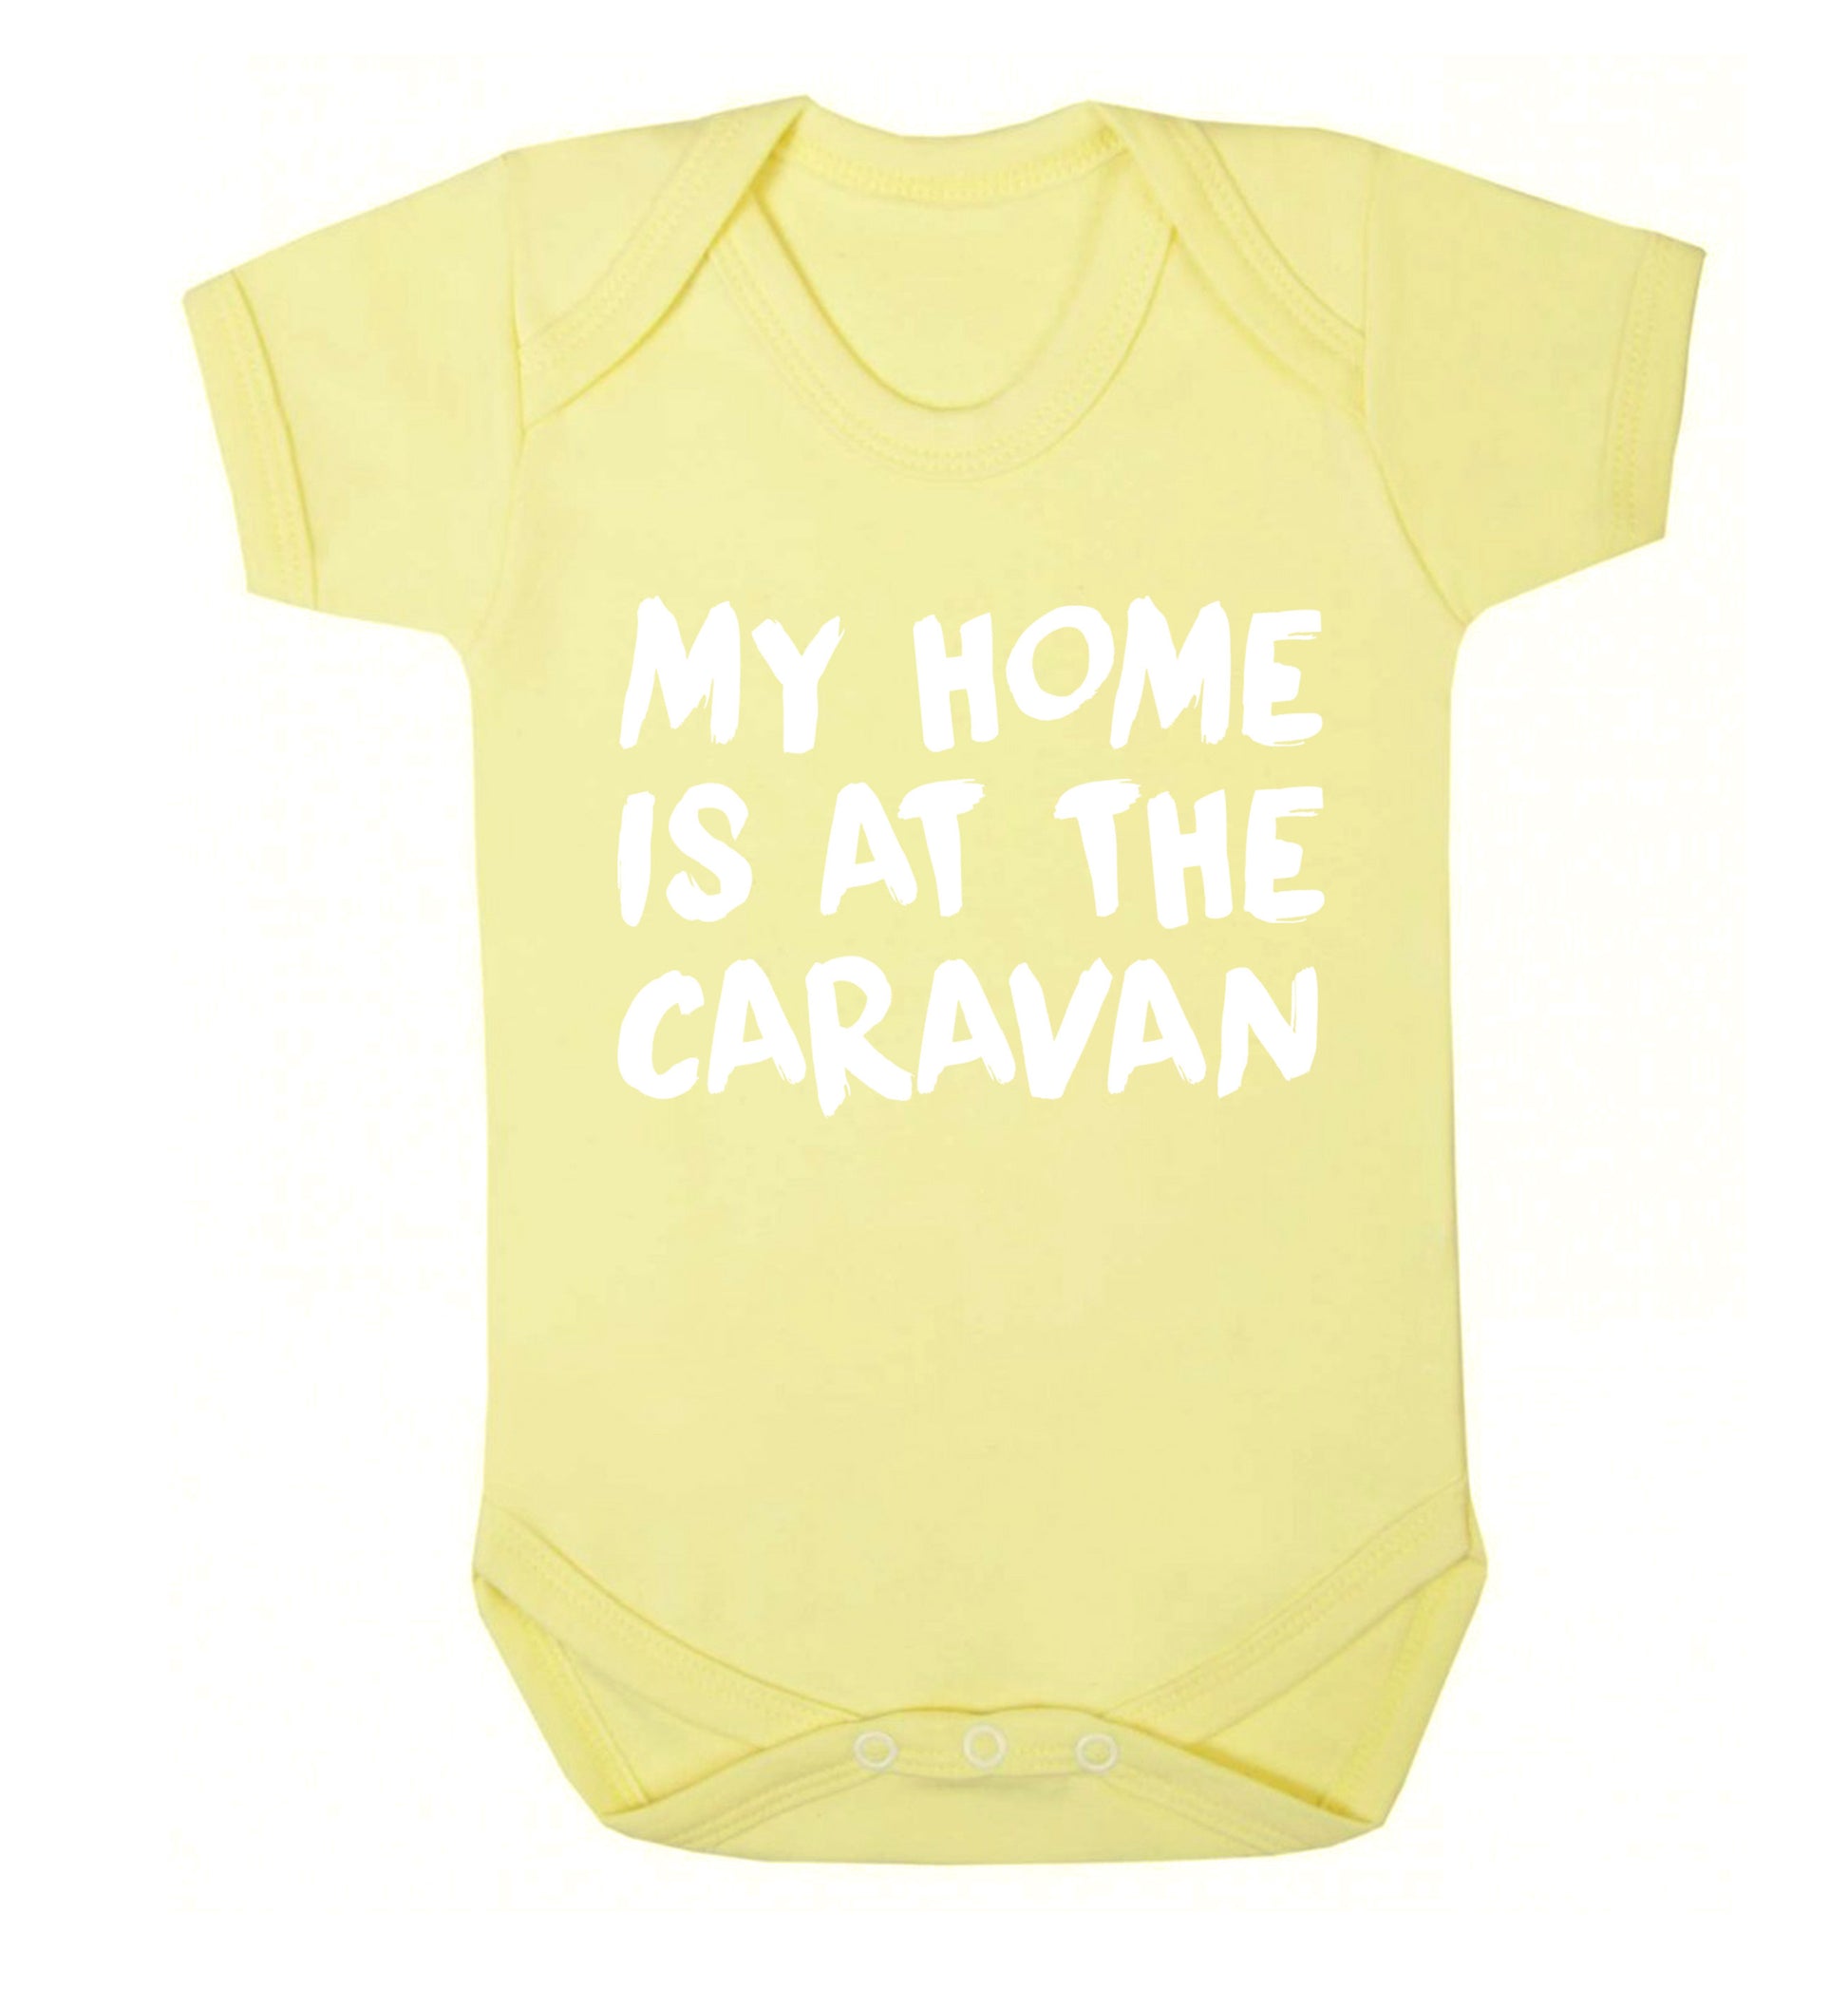 My home is at the caravan Baby Vest pale yellow 18-24 months